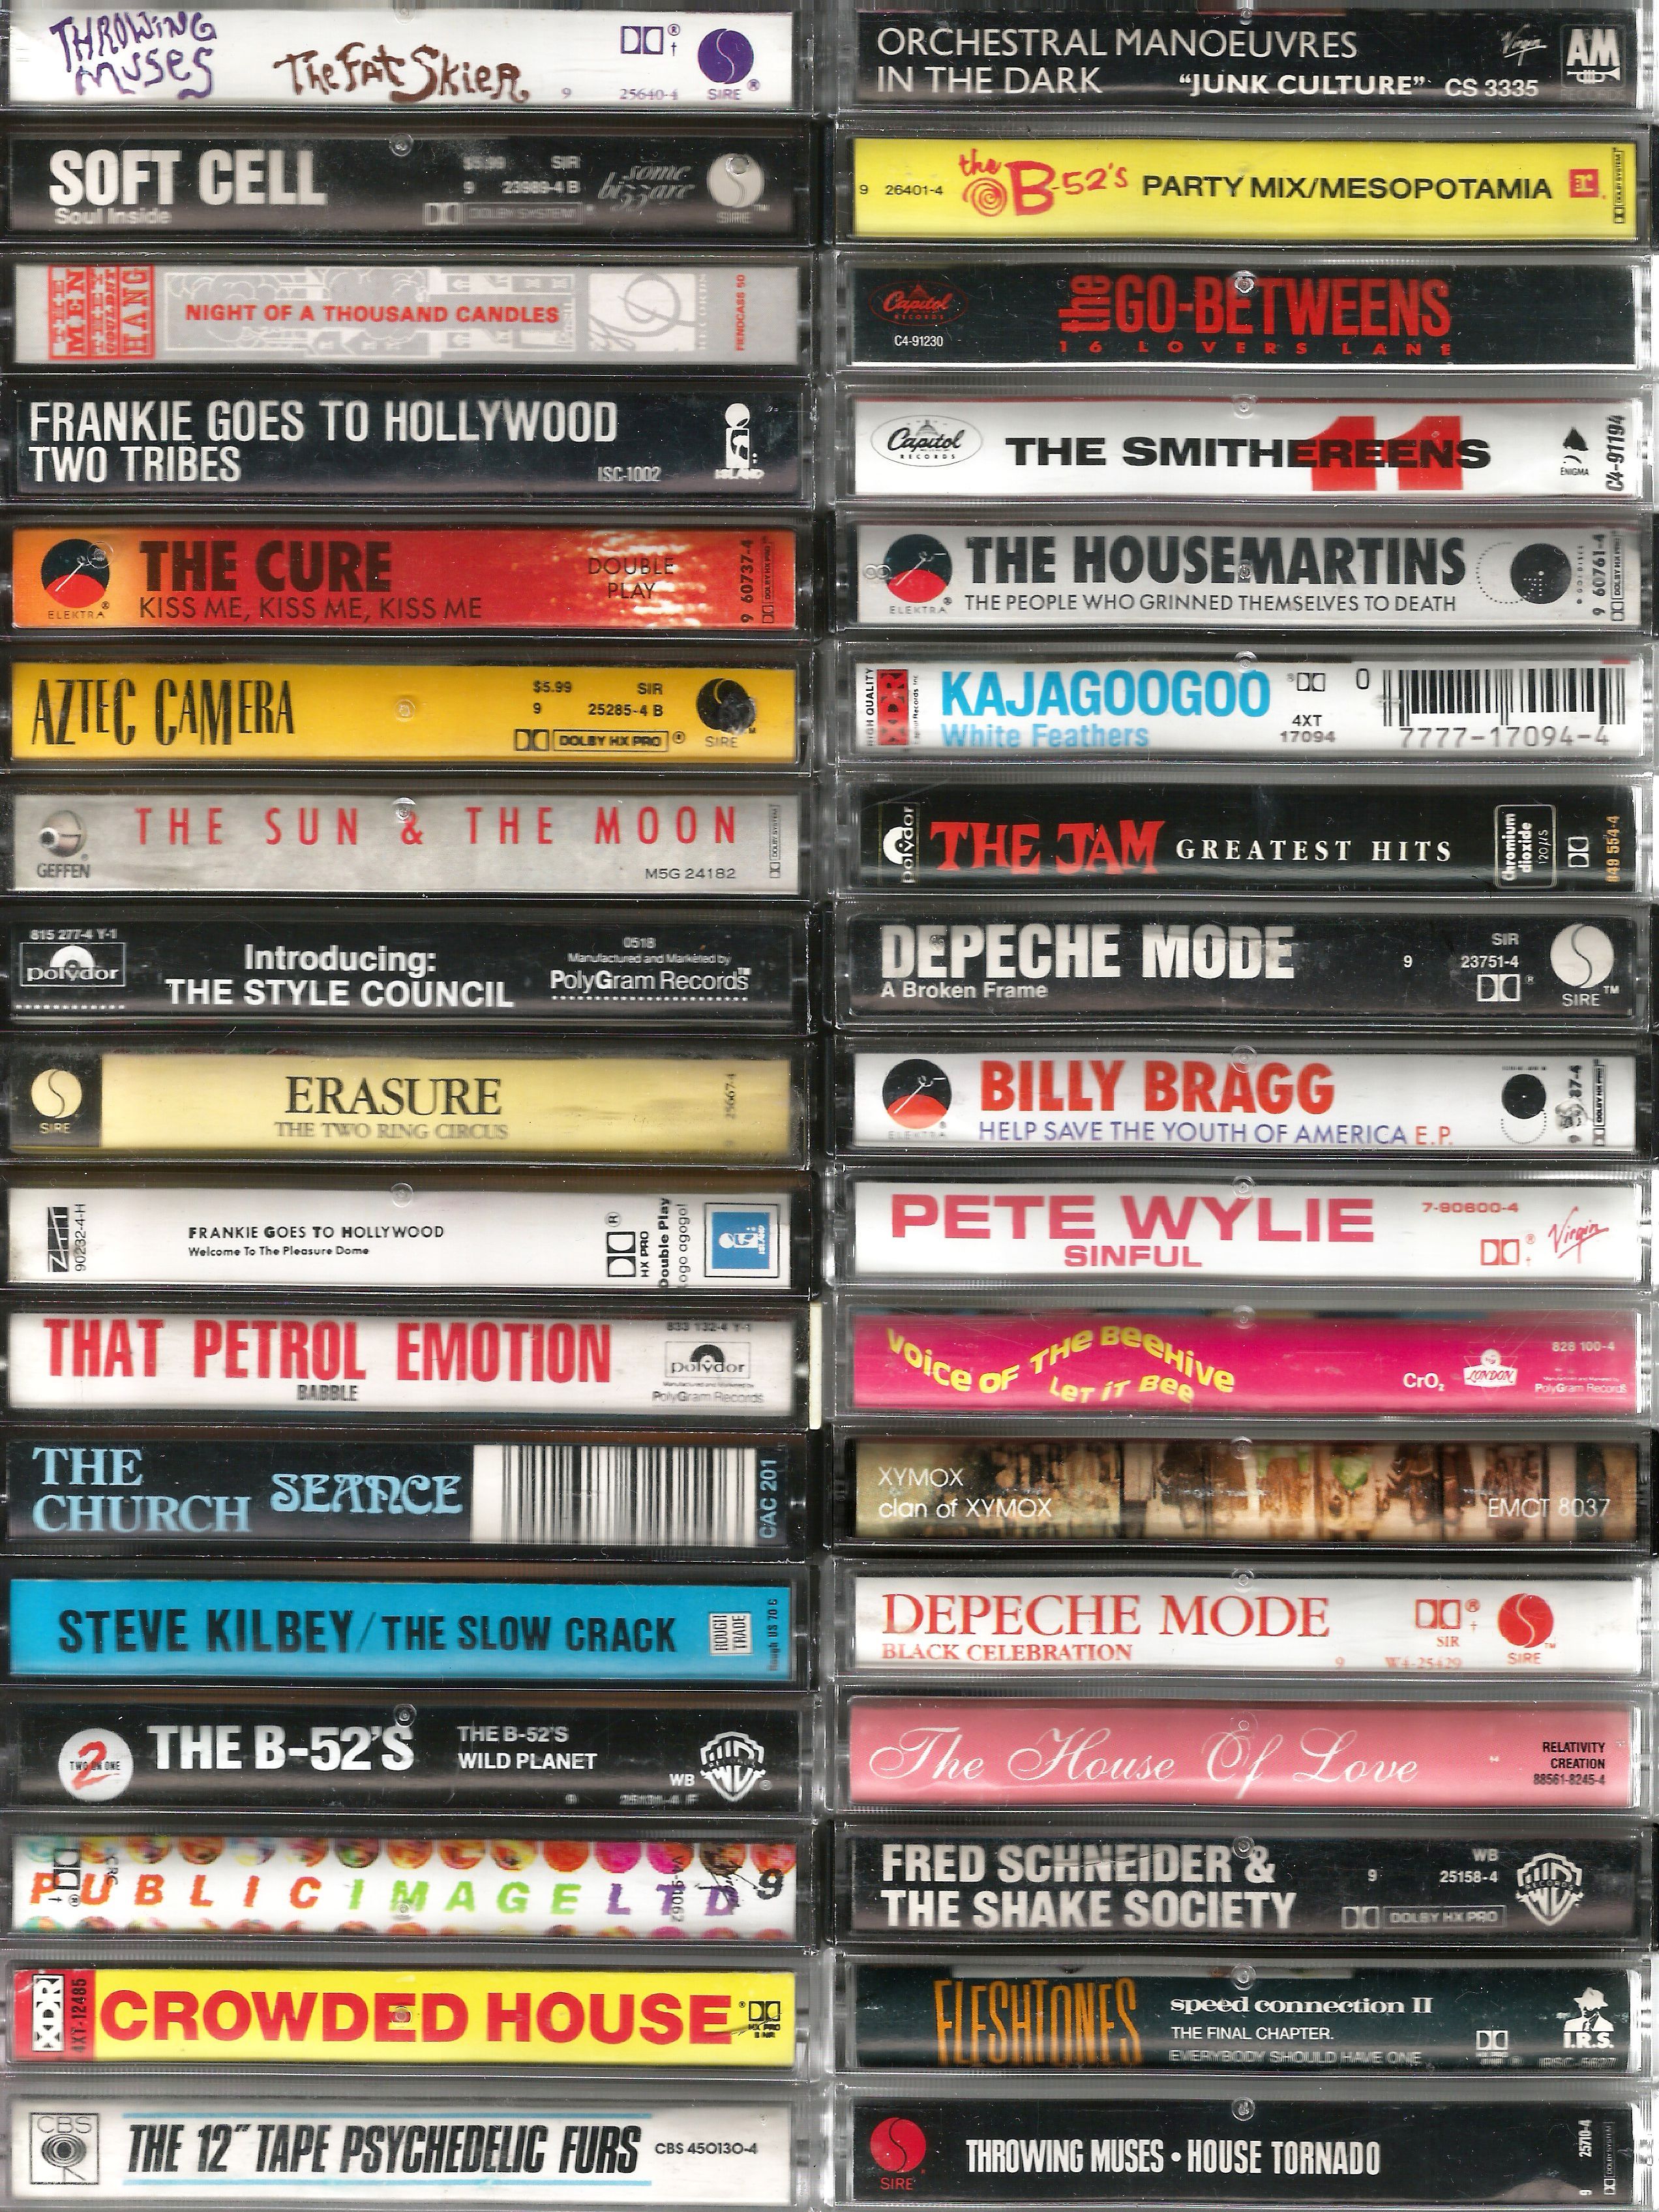 additional reasons why the 80s ruled. By Steve Vistaunet. iPhone wallpaper vintage, Vintage music, Music aesthetic